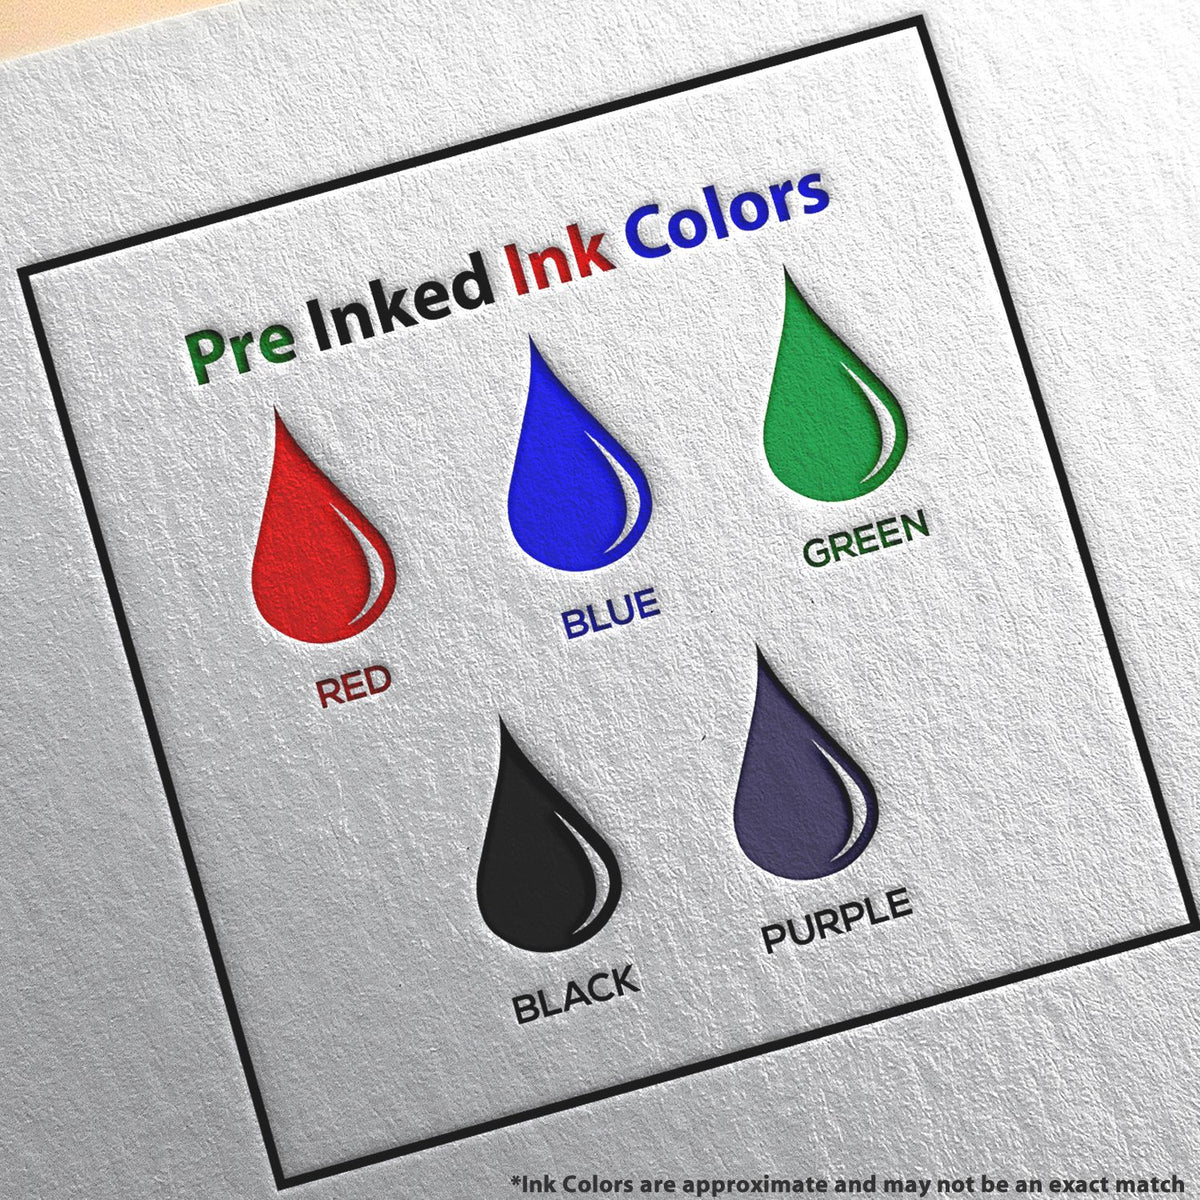 A picture showing the different ink colors or hues available for the MaxLight Premium Pre-Inked Connecticut State Seal Notarial Stamp product.